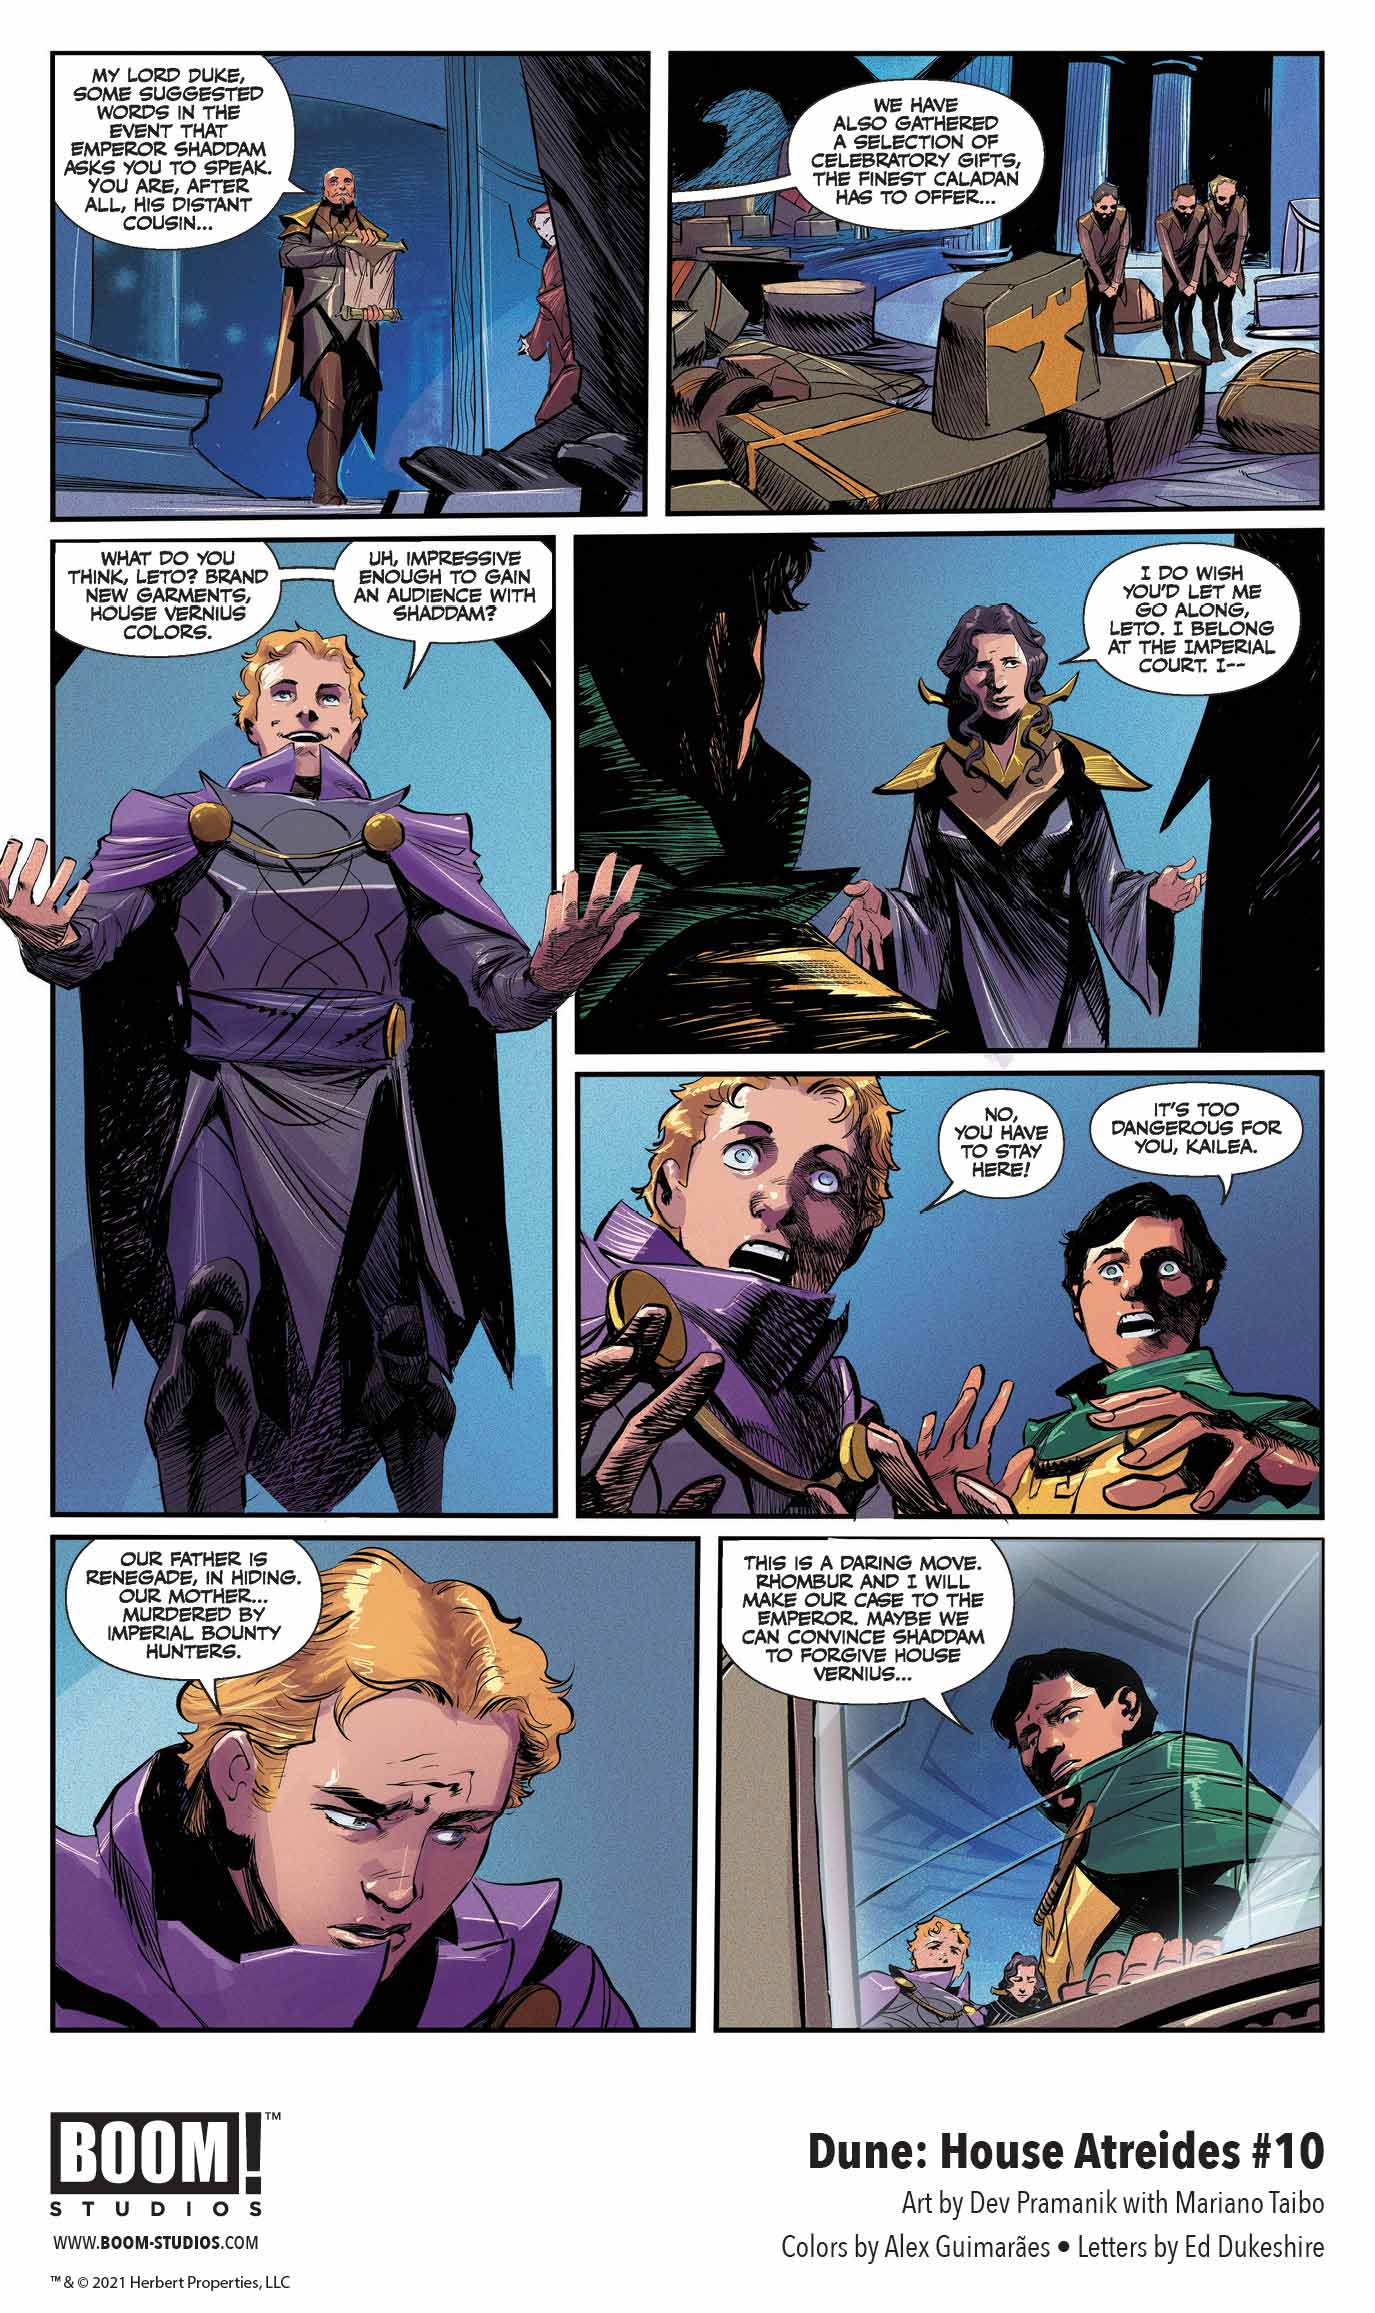 Dune: House Atreides comic series. Issue #10, preview page 2.